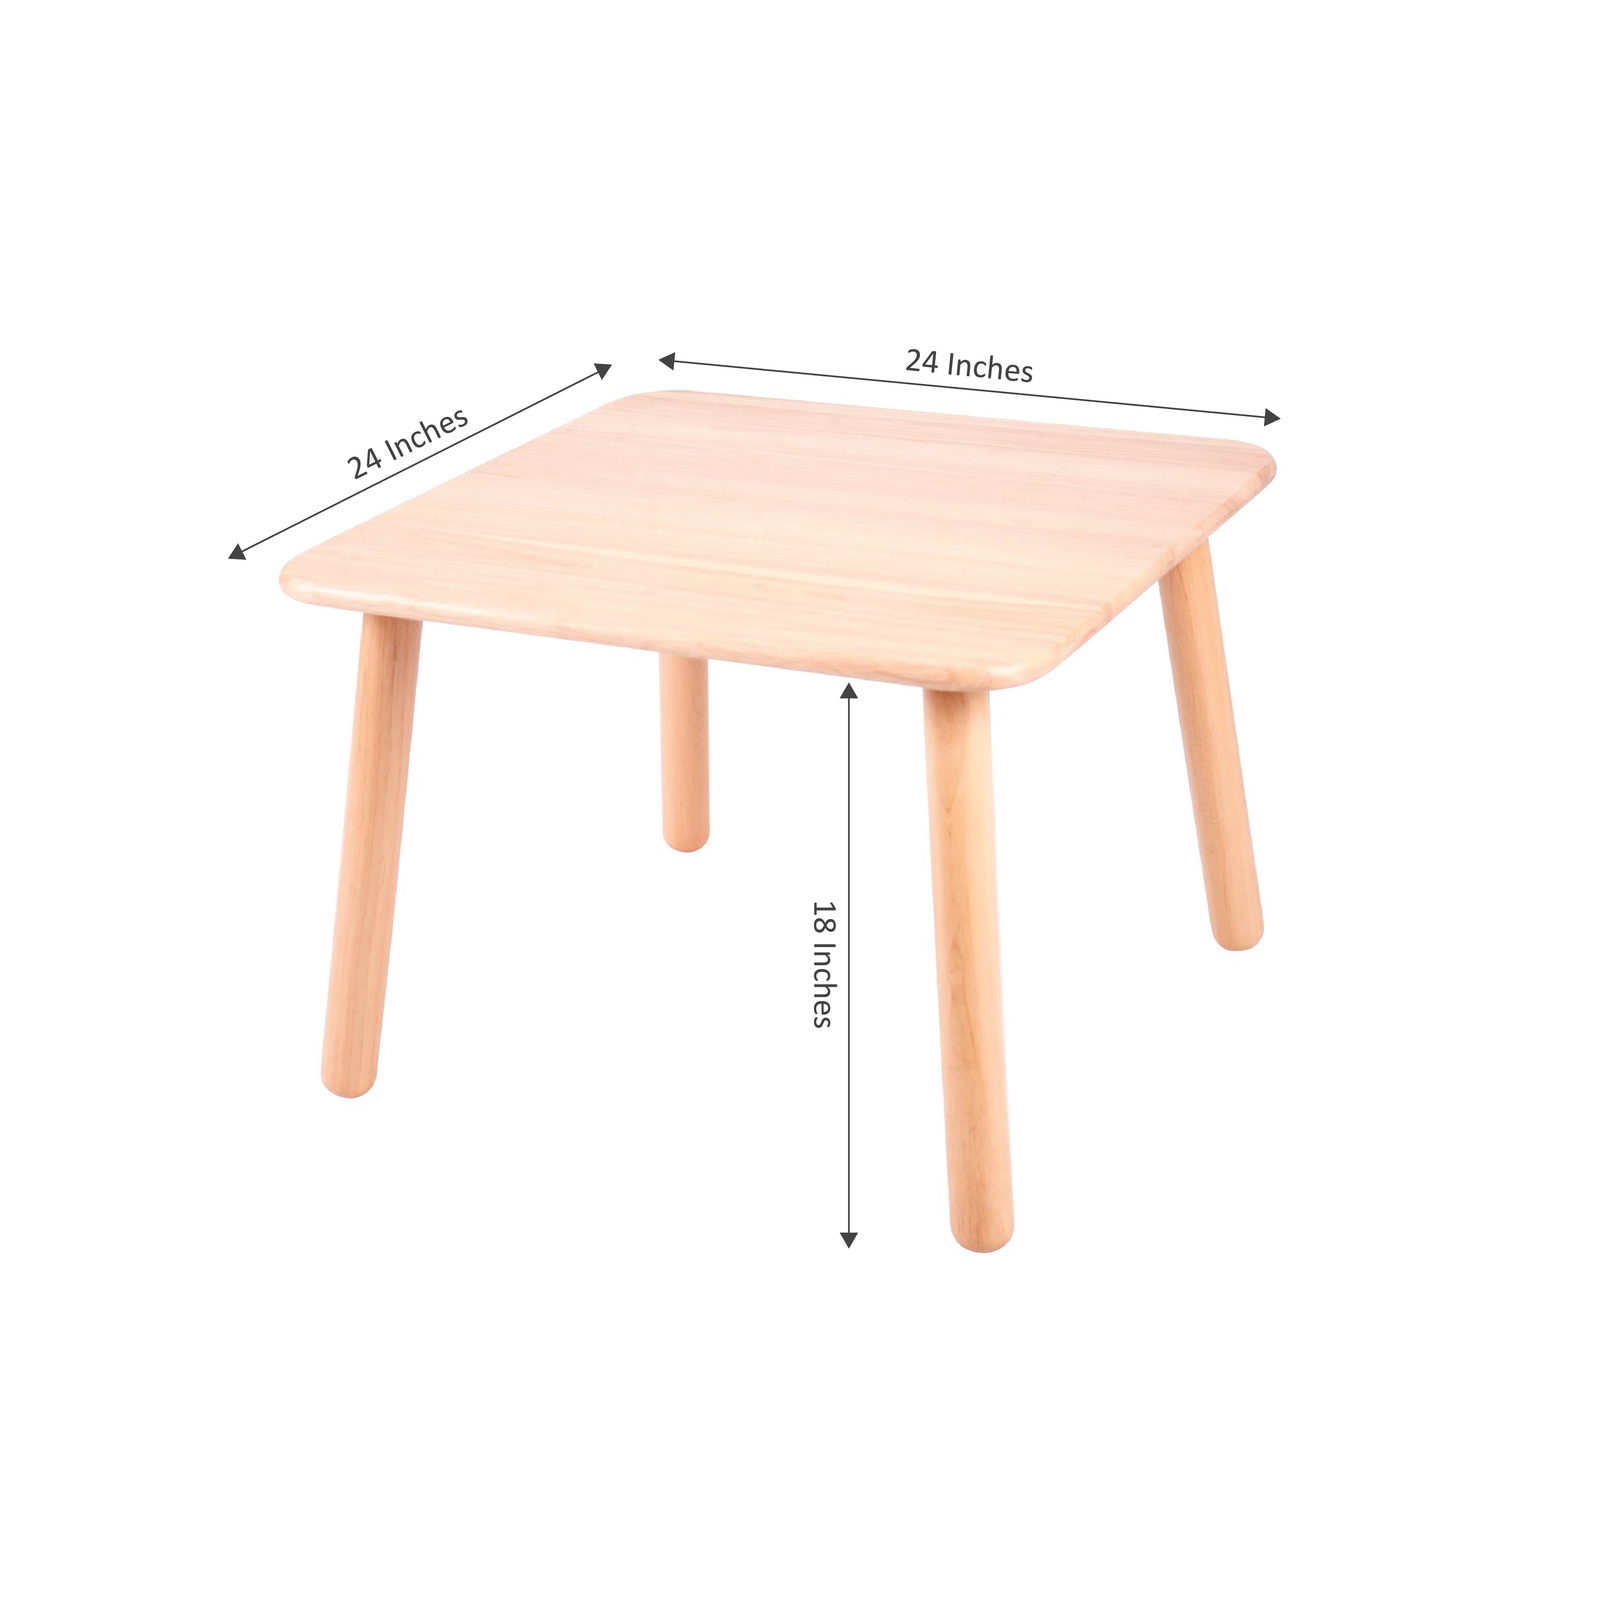 wooden furniture with smooth and rounded edges for play time, meal time, home decor